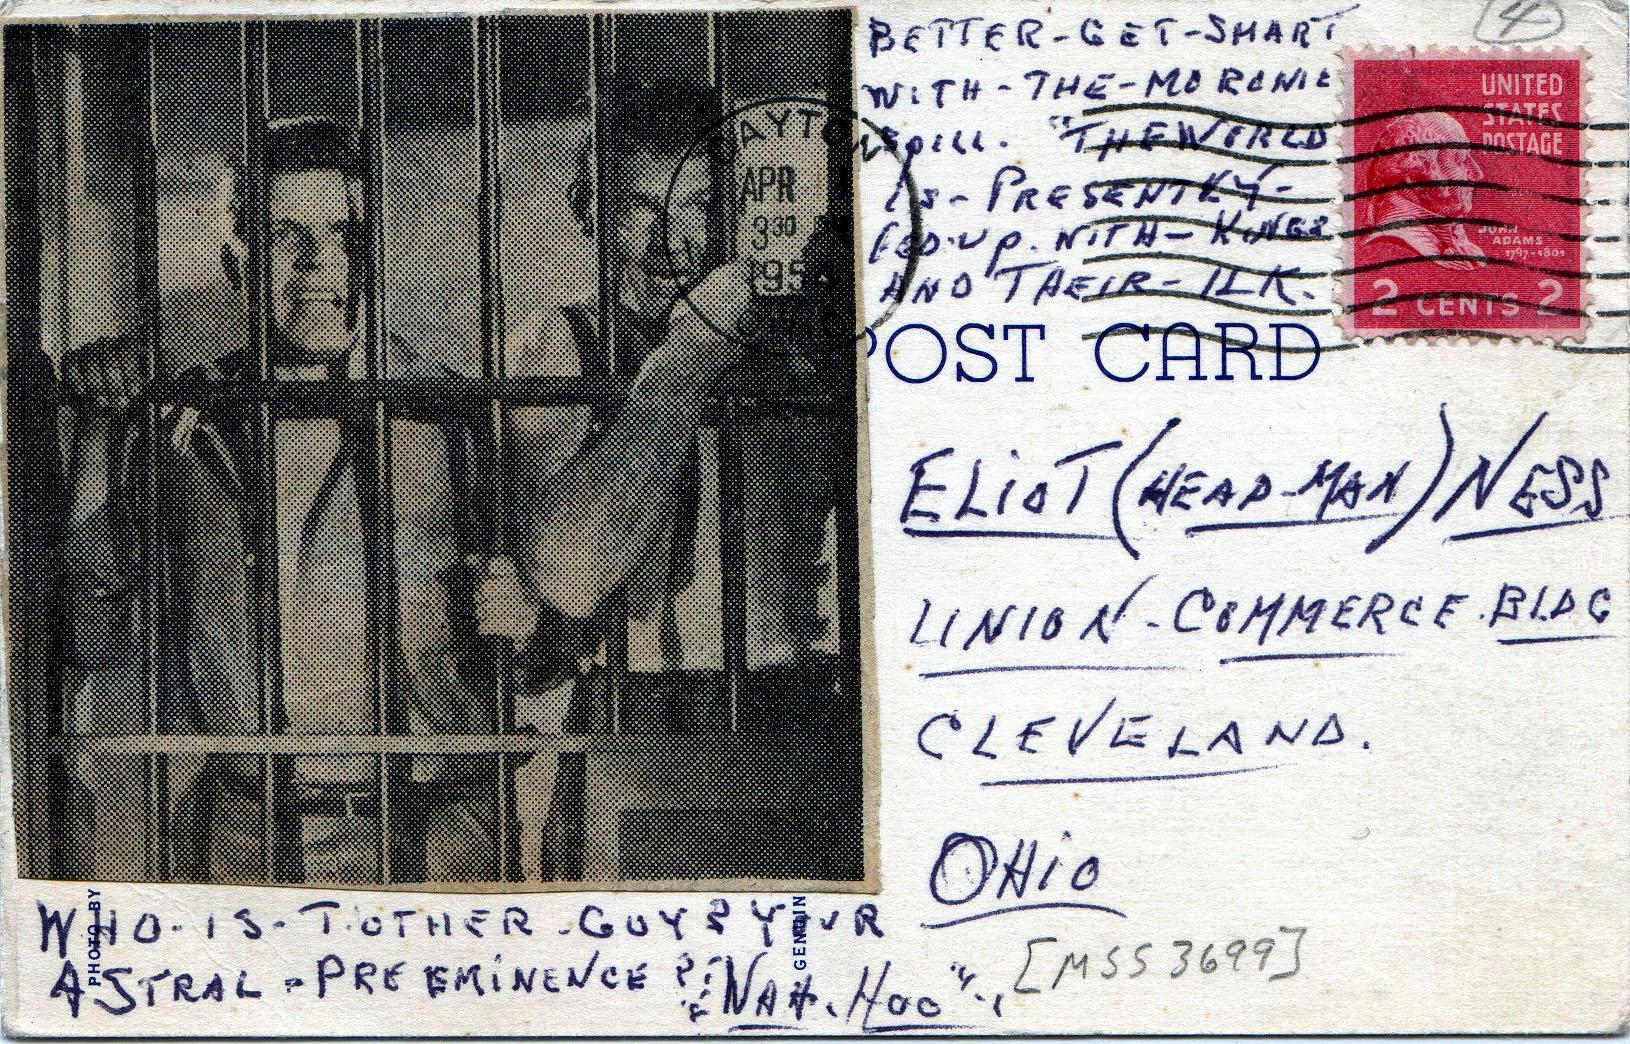 Postcard (5 of 5) sent to Eliot Ness in 1954 by an asylum inmate believed by some to have been the torso murderer.